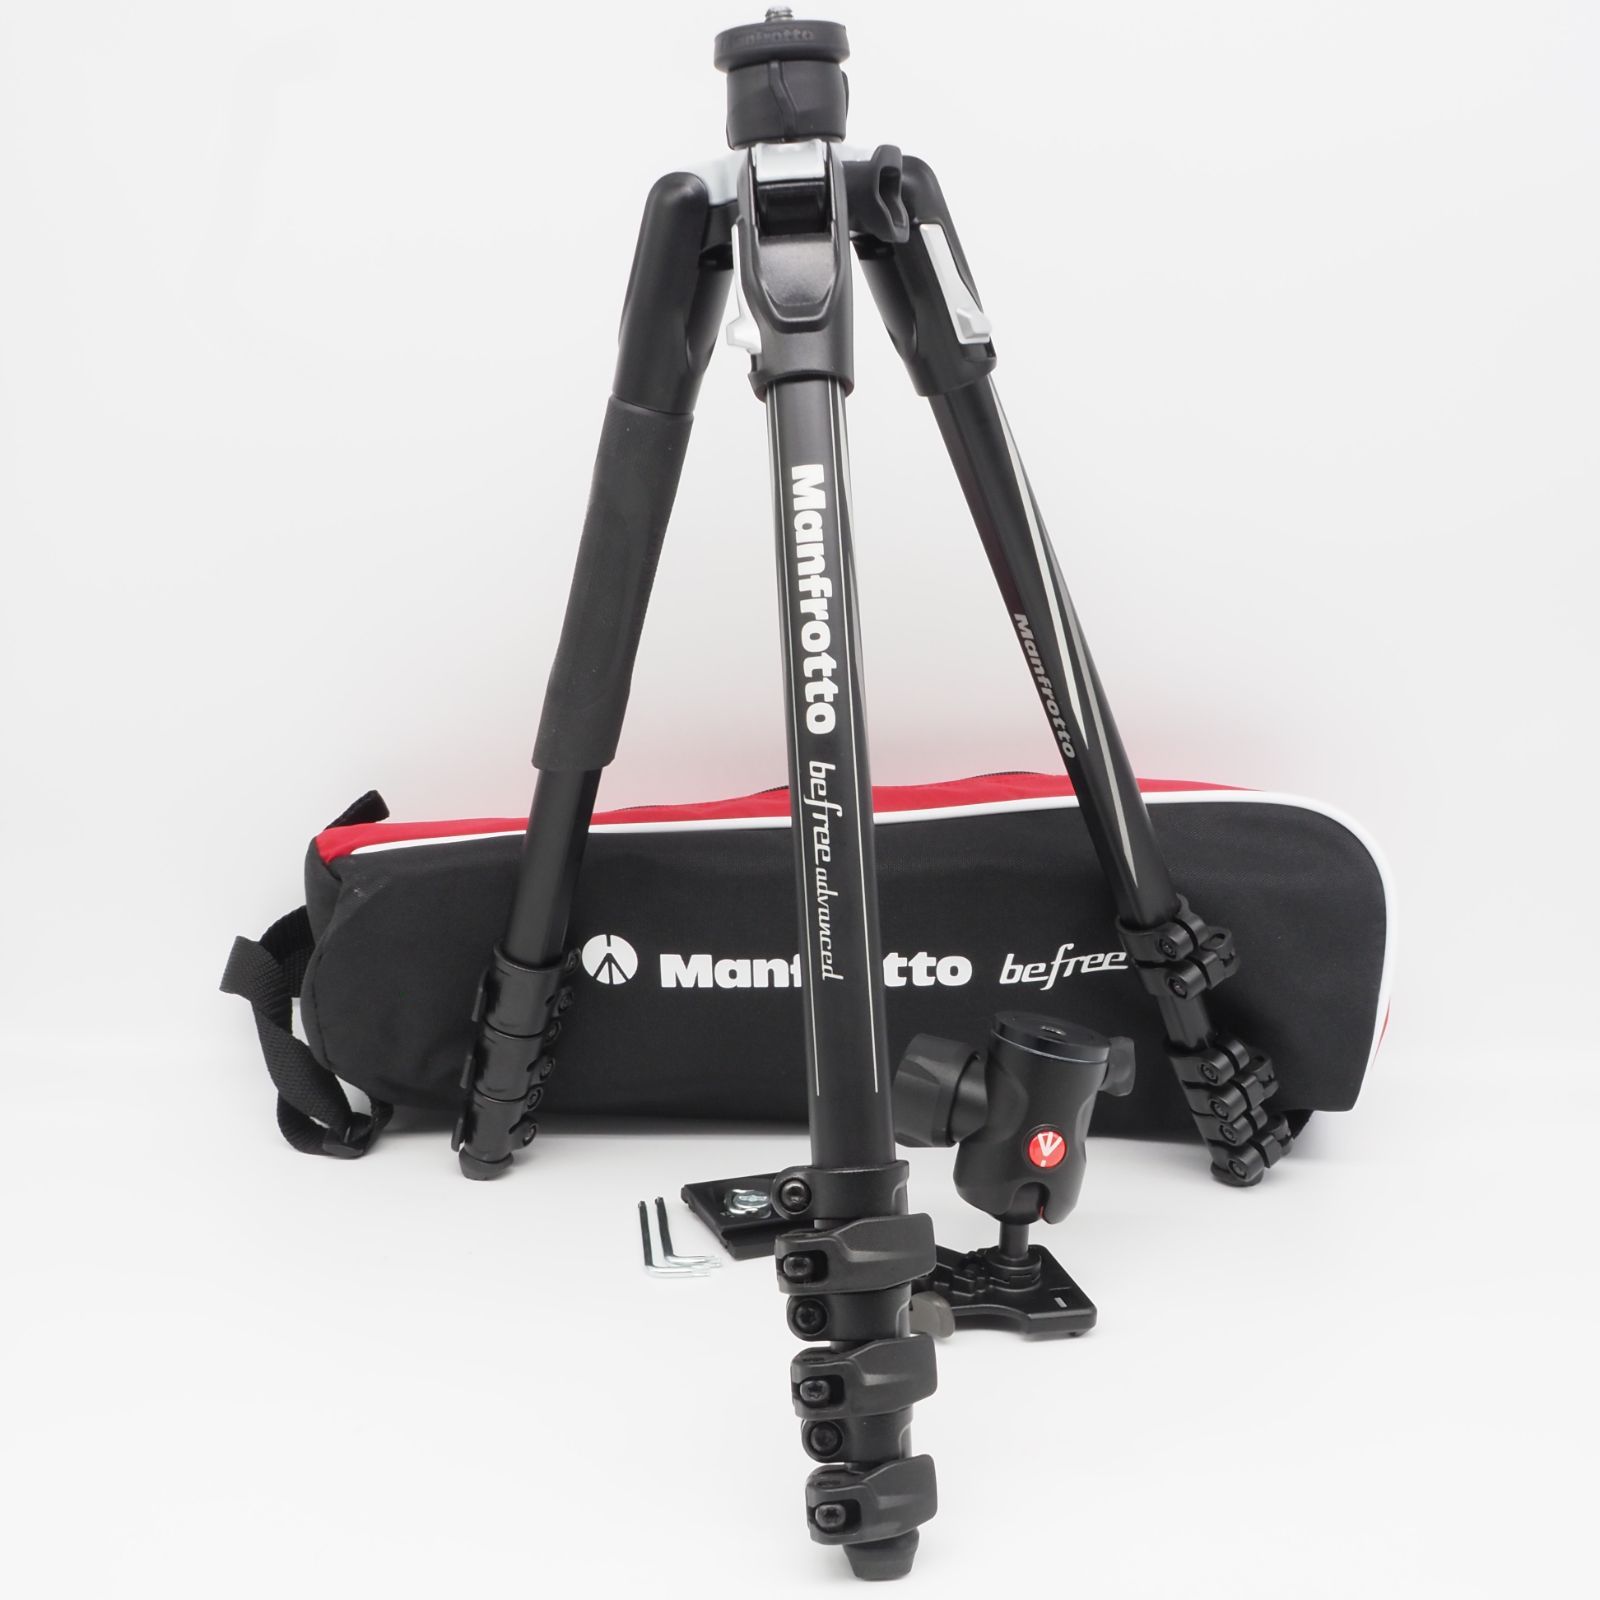 Manfrotto コンパクト三脚 Befree MKBFRA4-BH | hmgrocerant.com